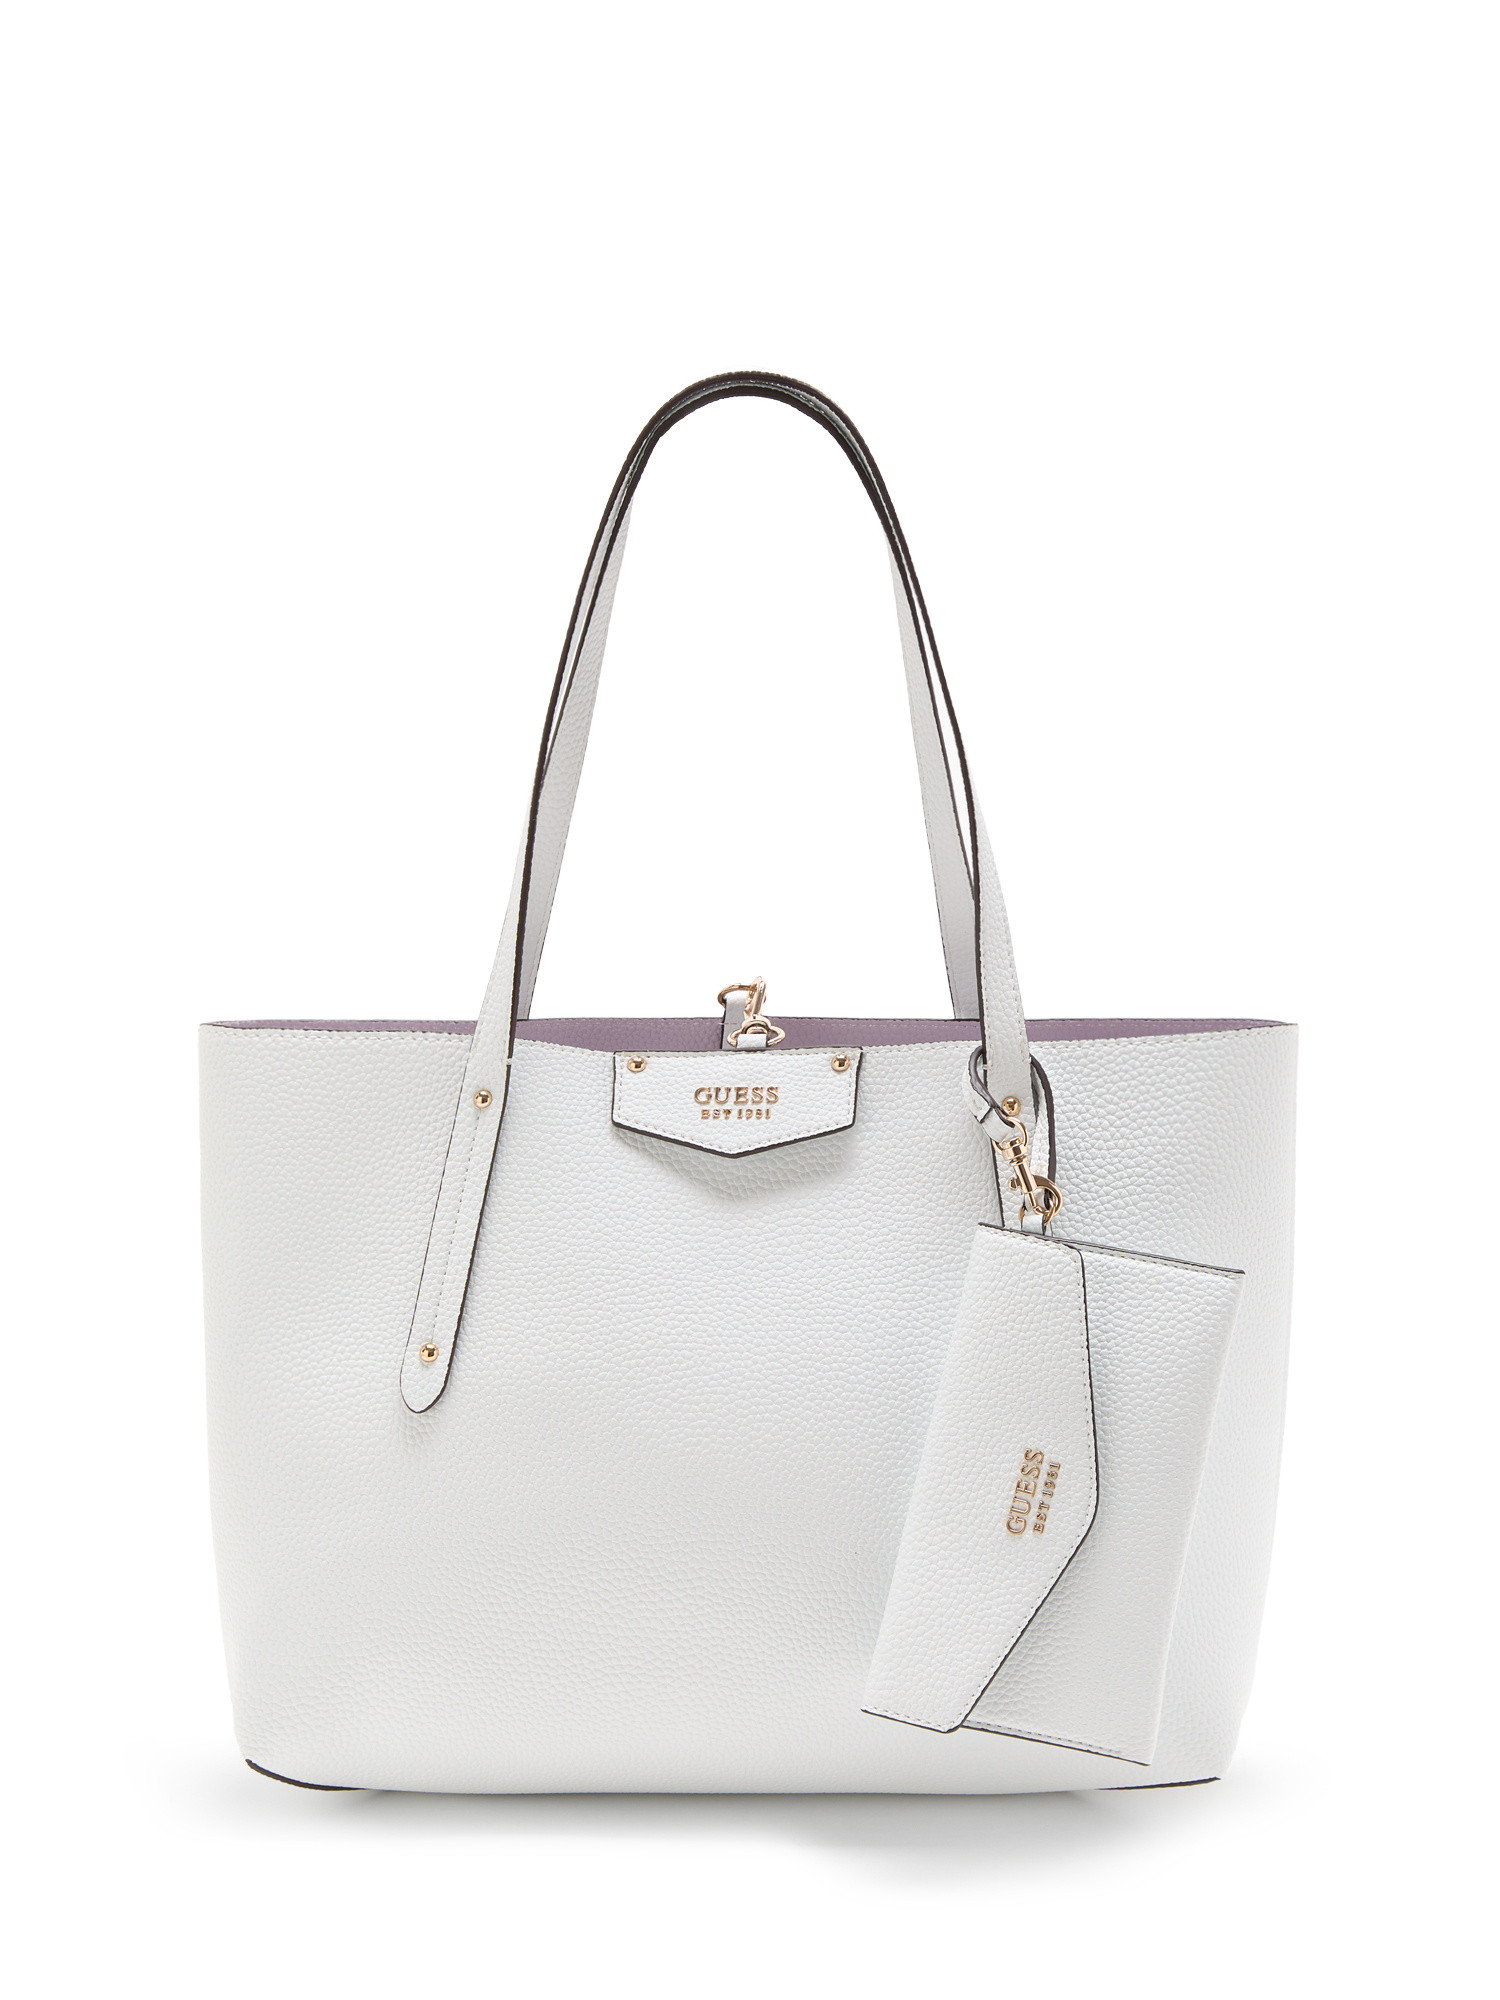 Guess - Brenton eco shopper, White, large image number 0